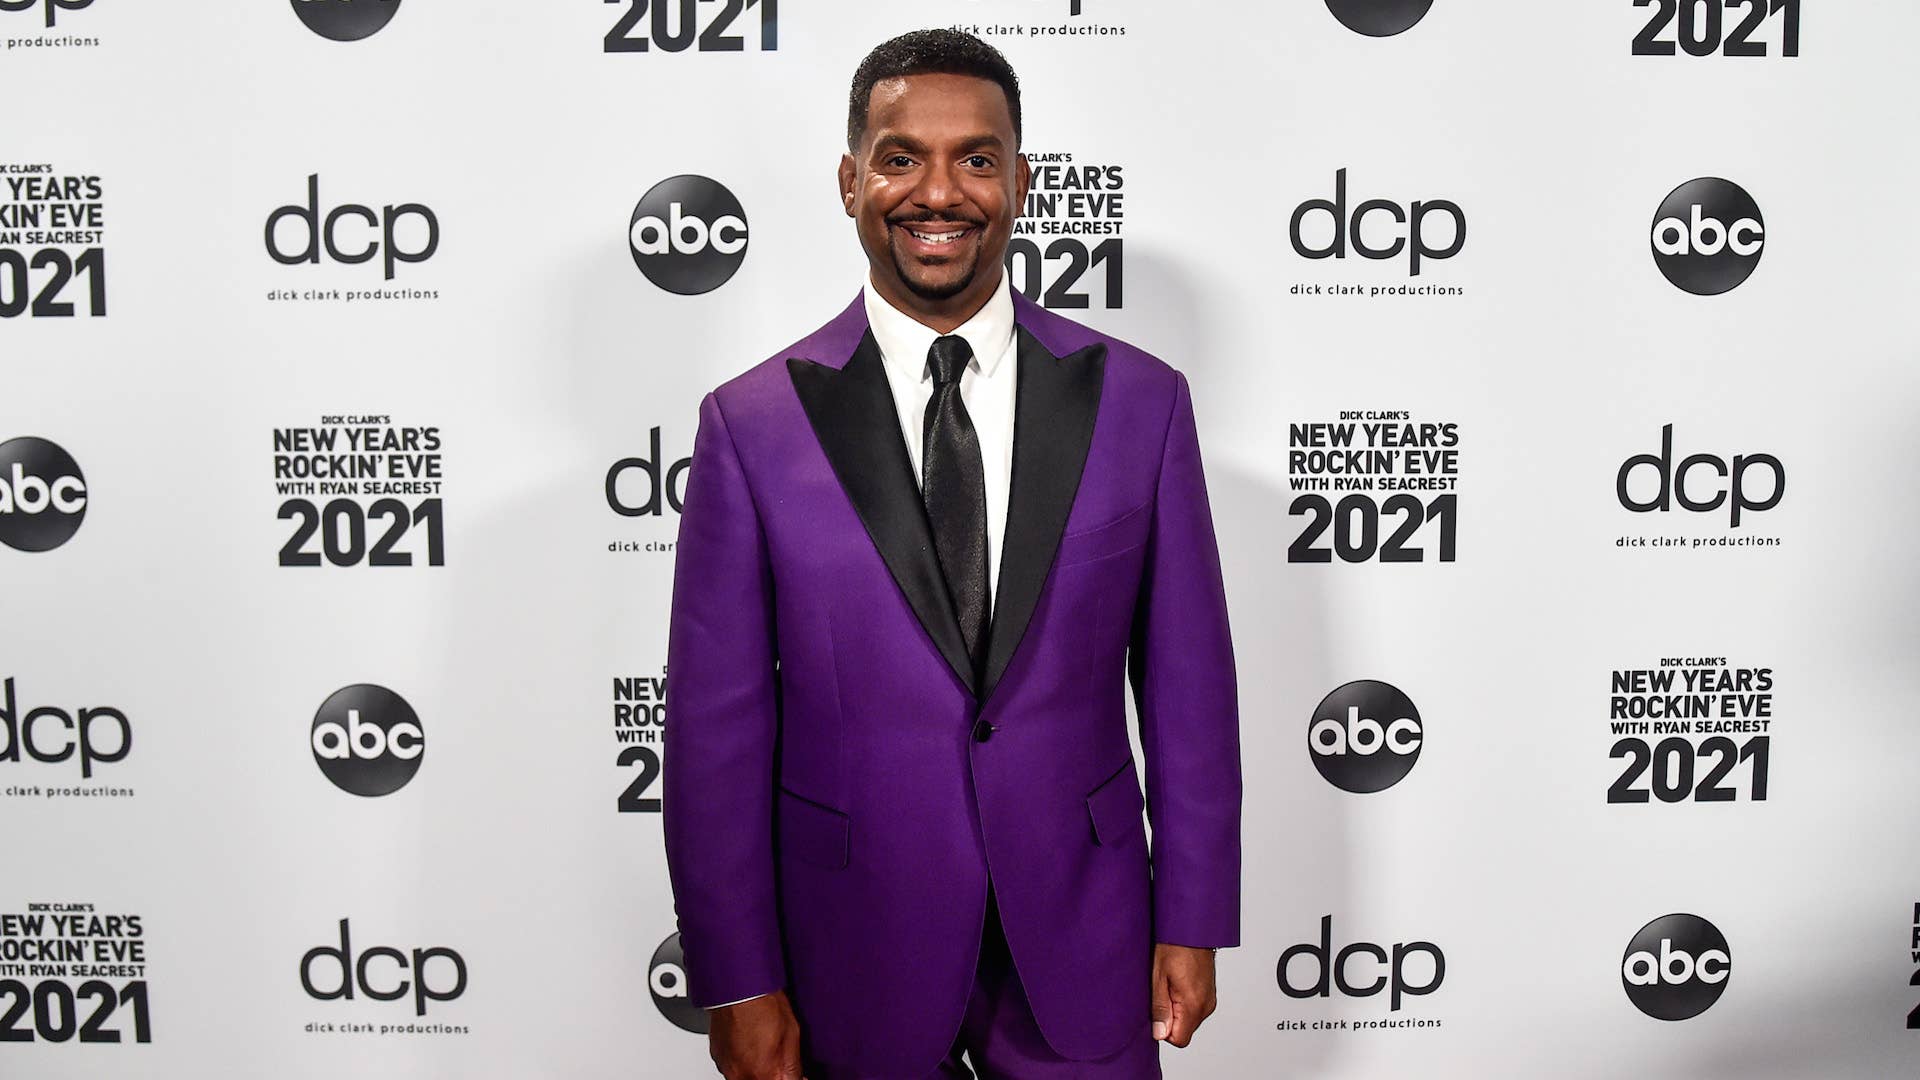 Alfonso Ribeiro arrives at Dick Clark's New Year's Rockin' Eve with Ryan Seacrest